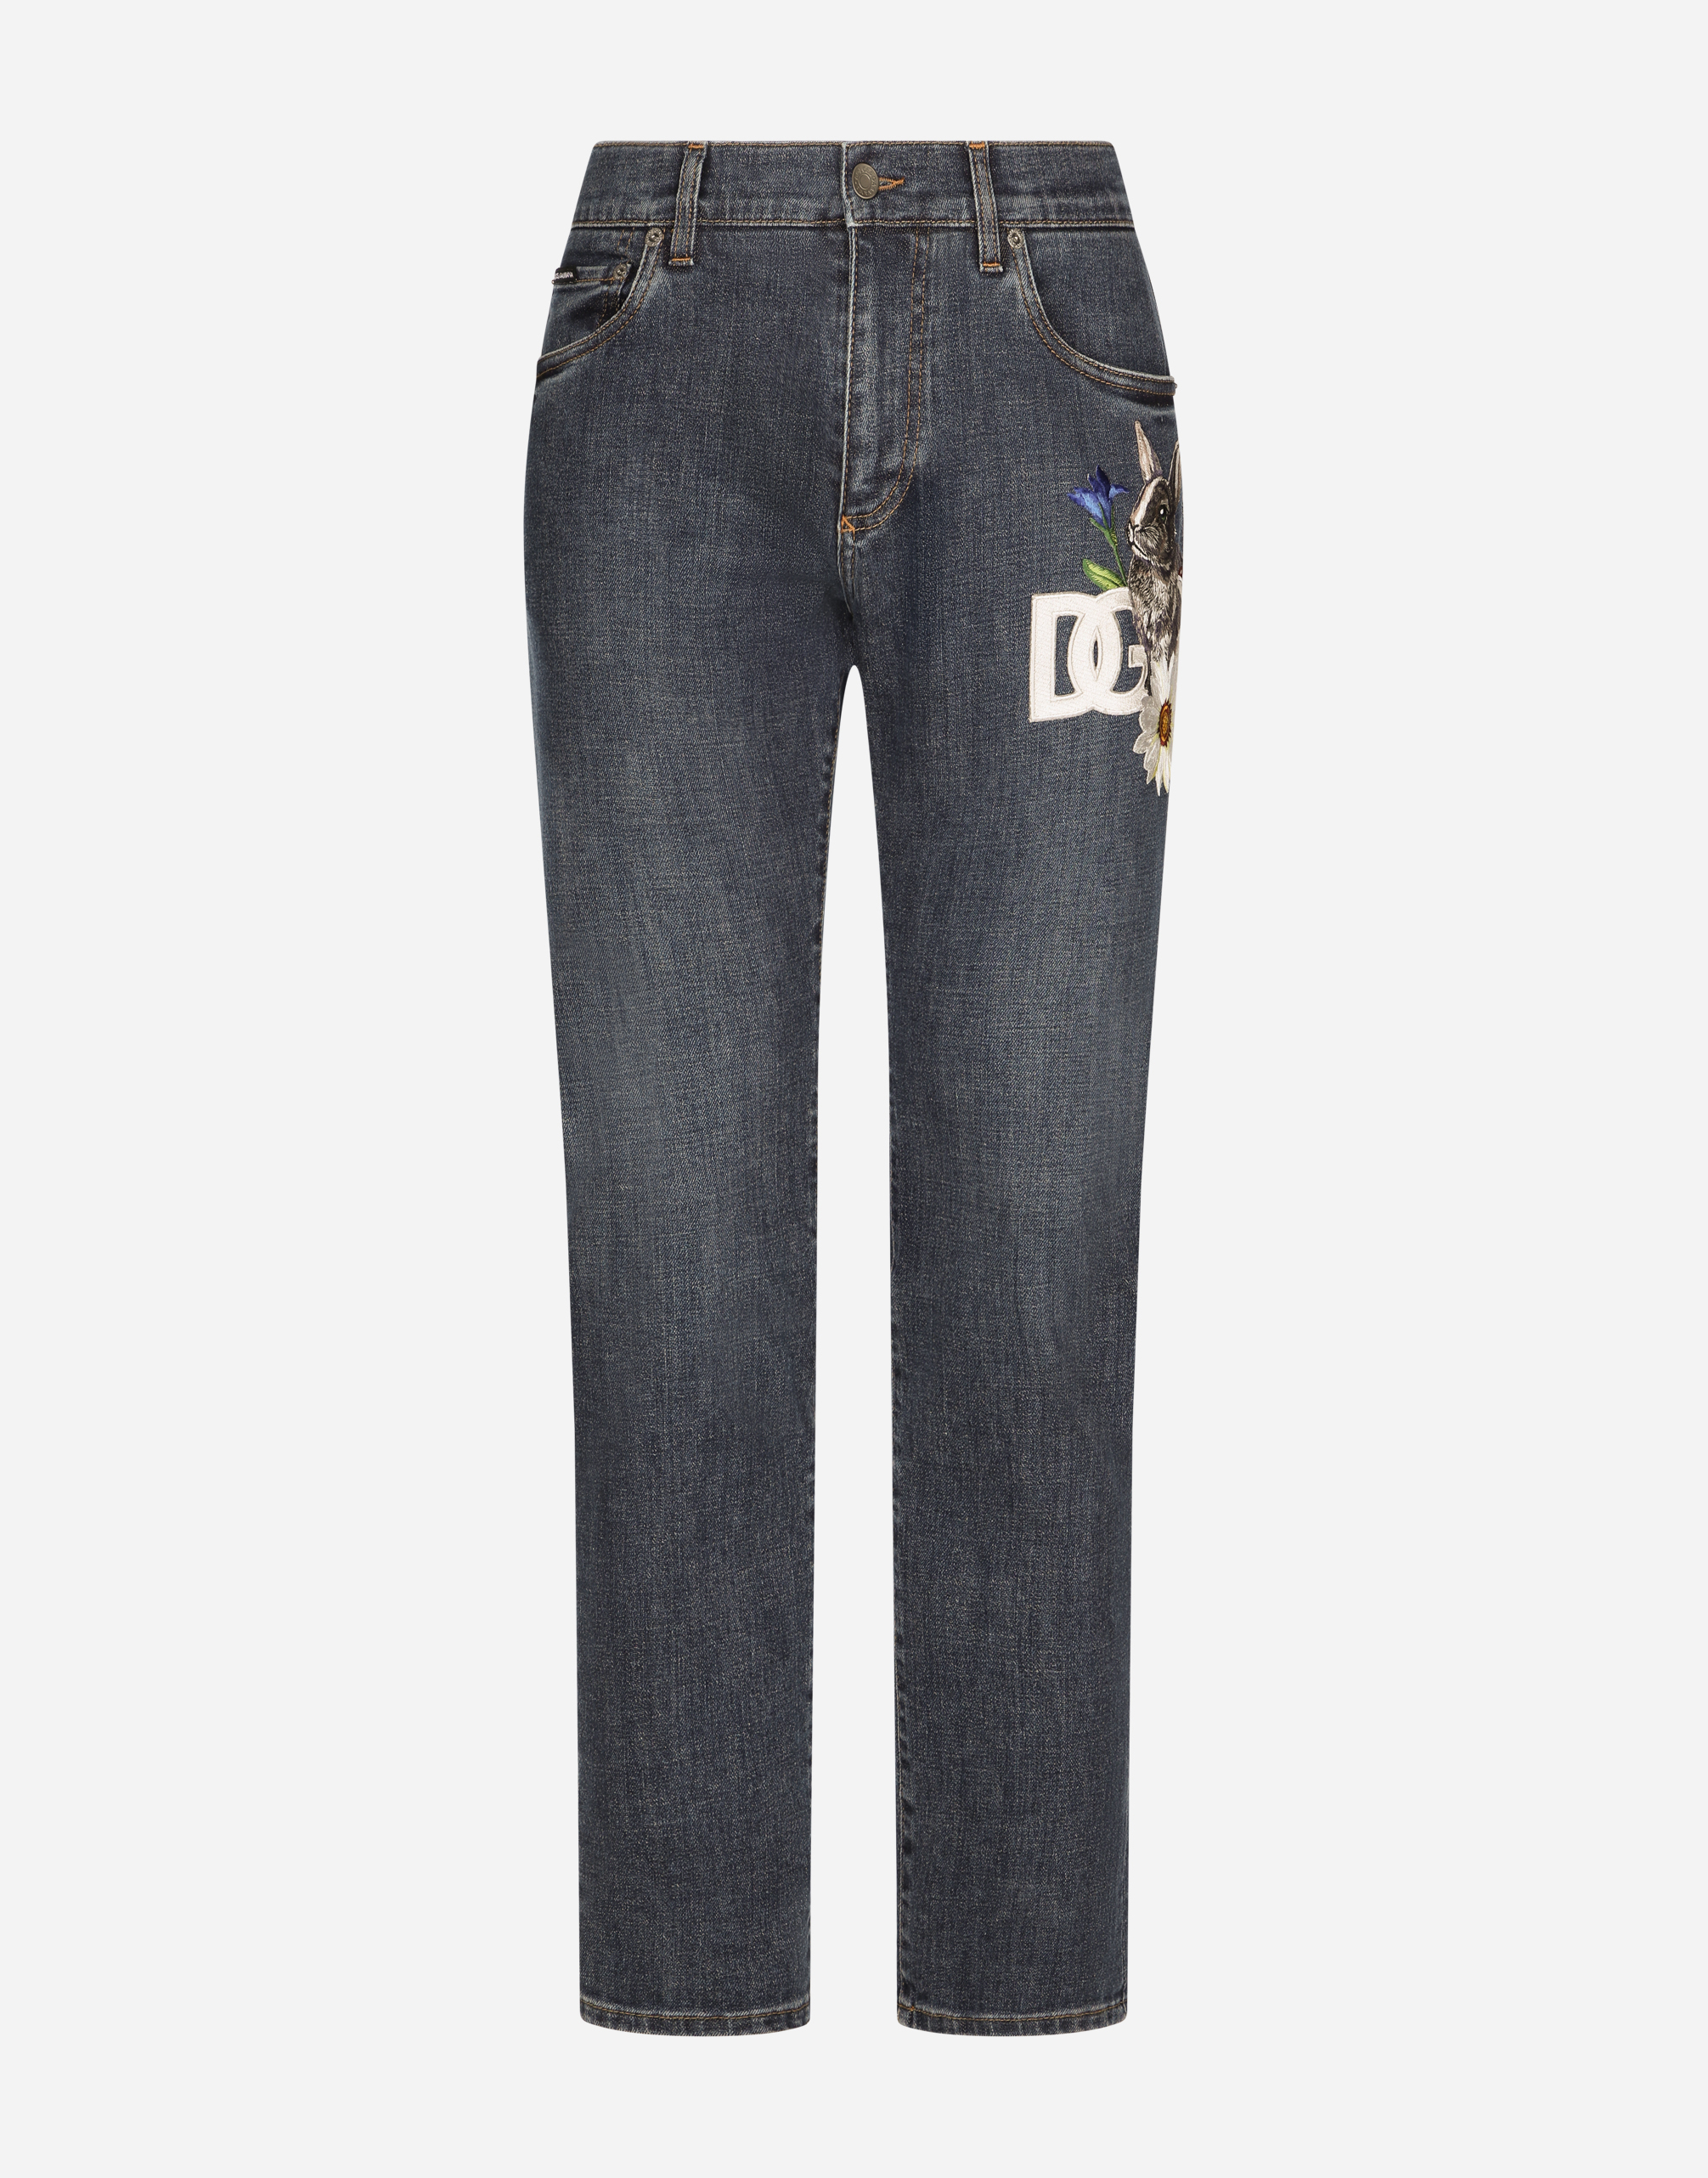 Slim-fit stretch denim jeans with DG patch in Multicolor